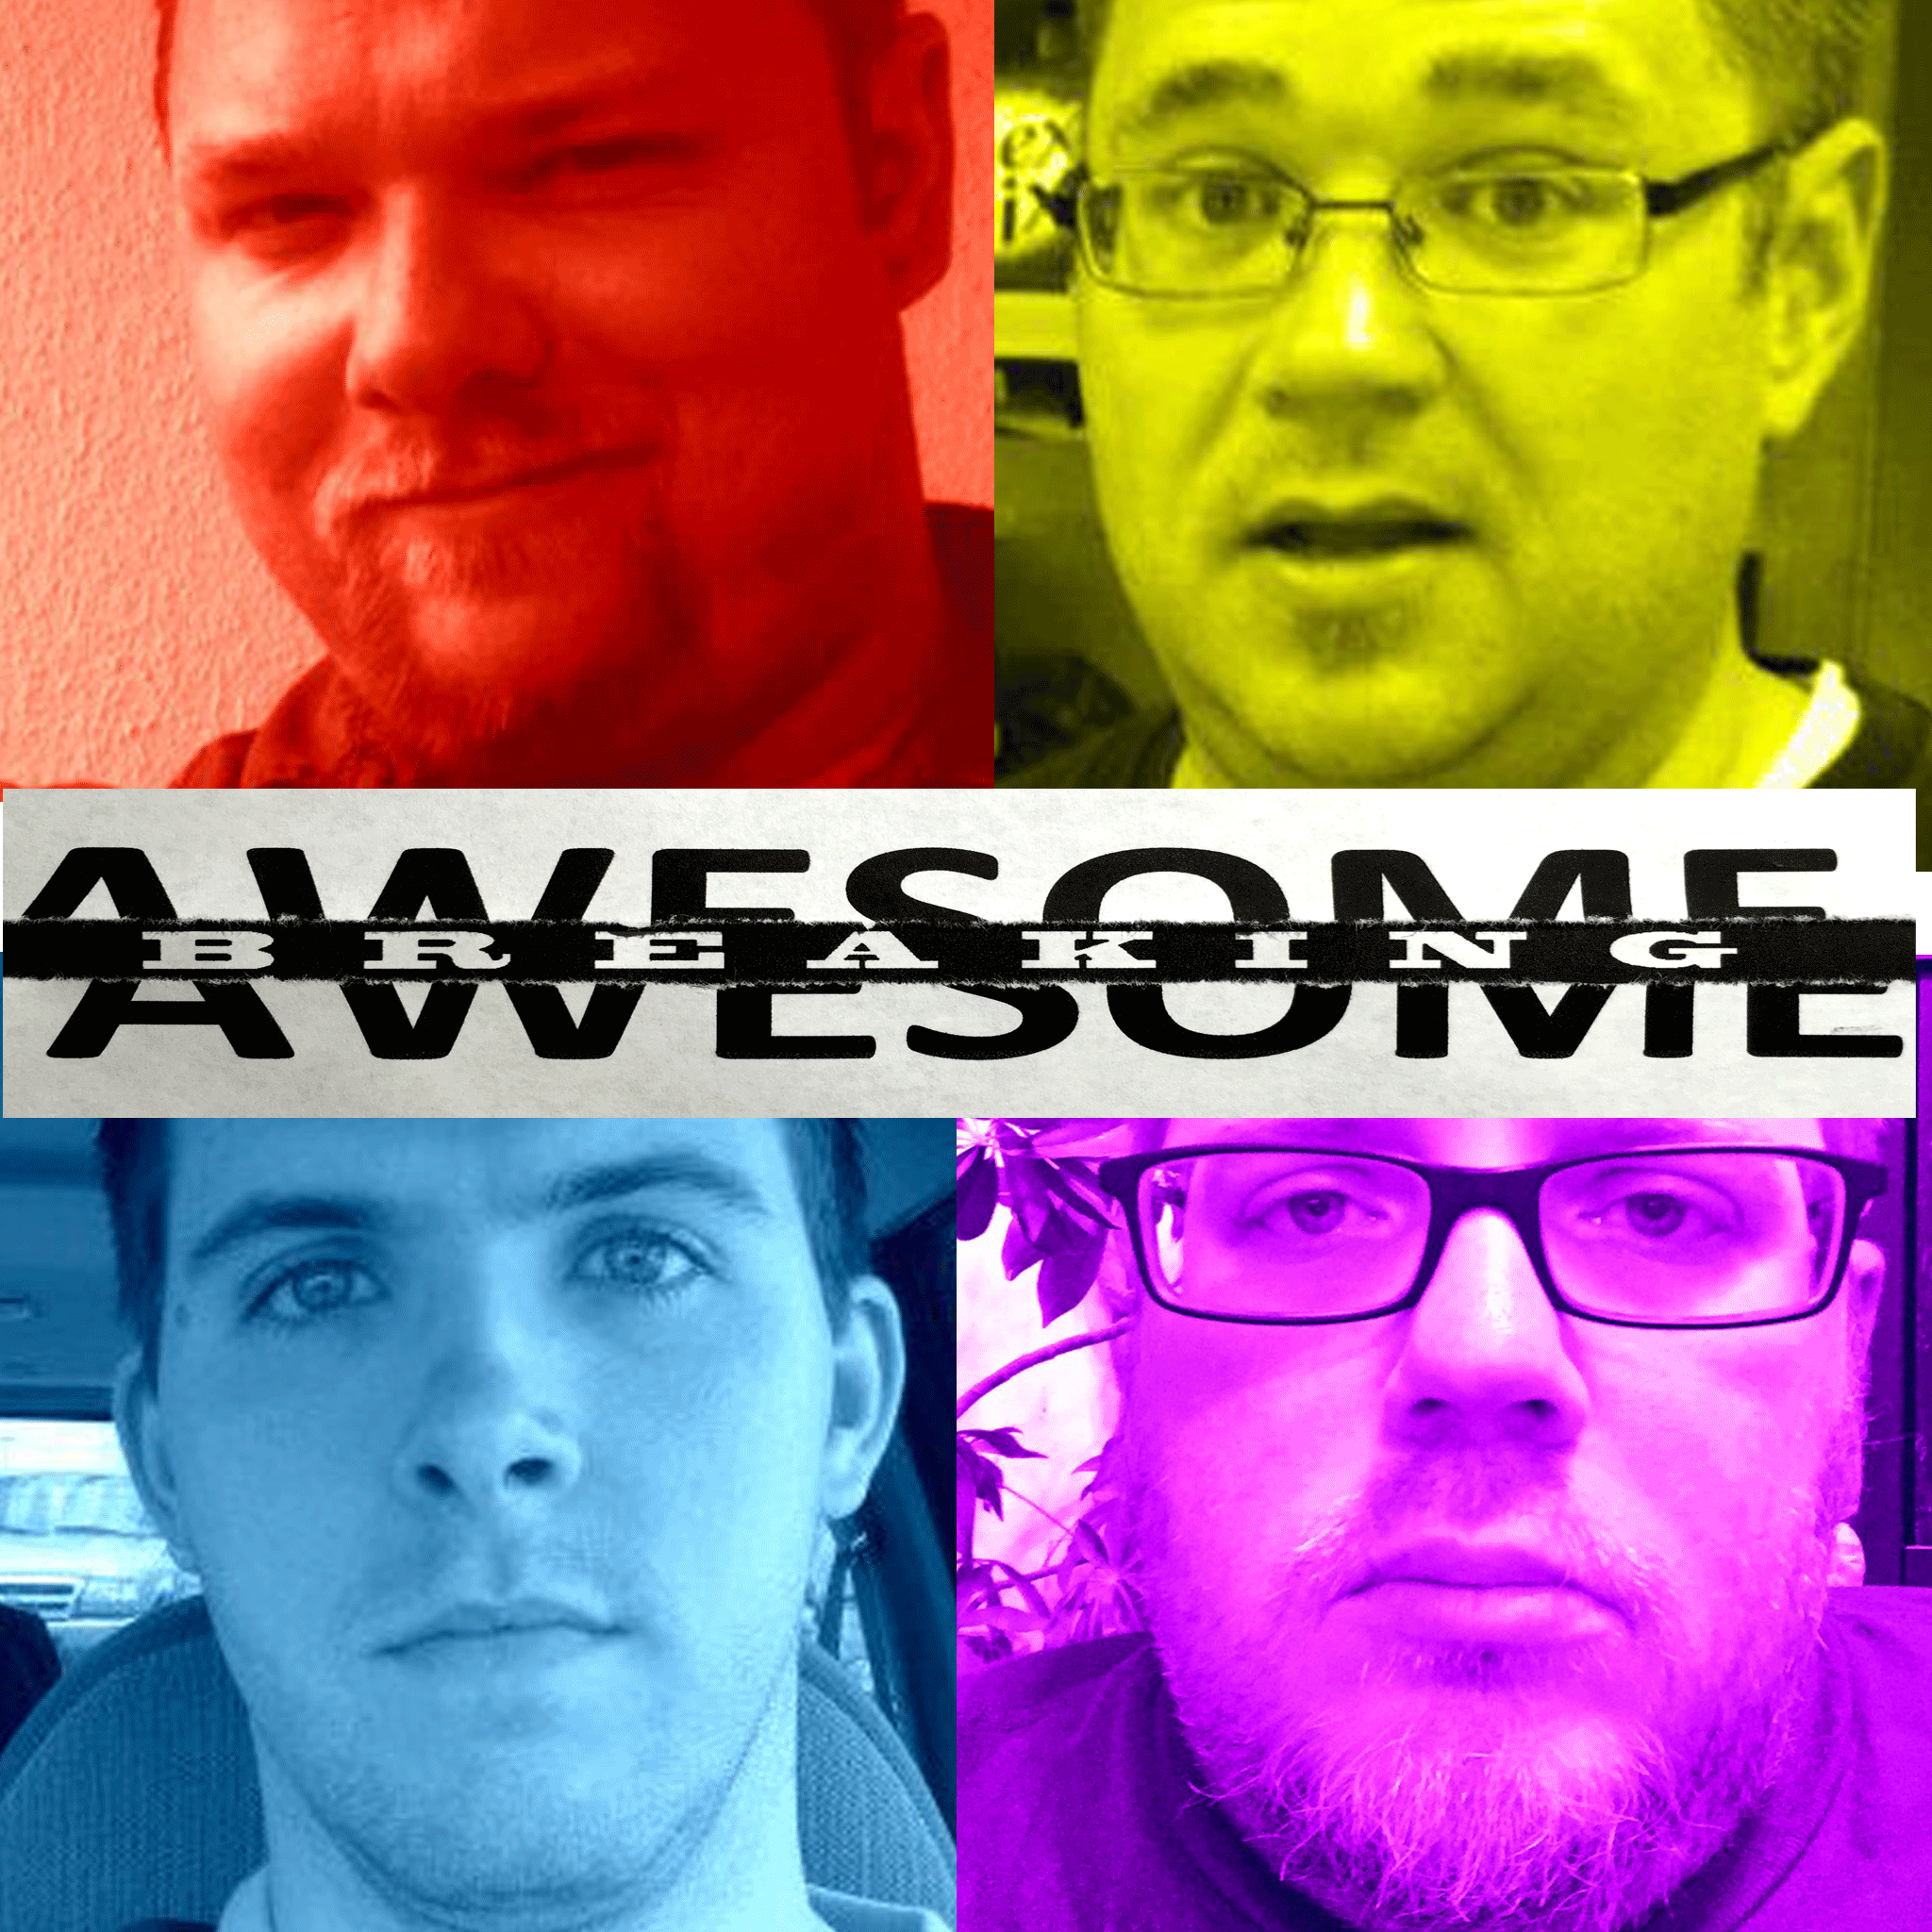 Breaking Awesome